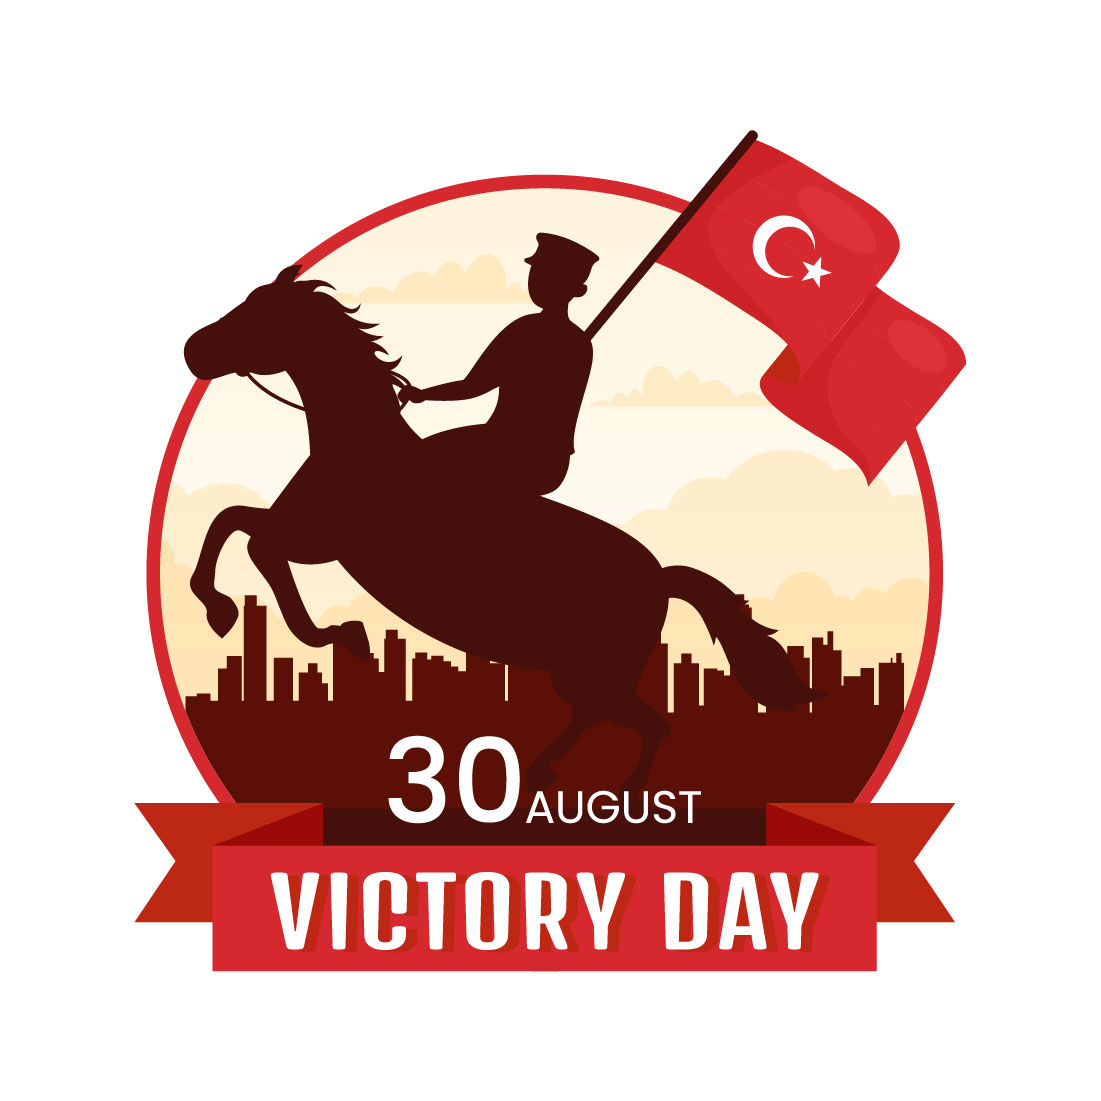 14 Turkey Victory Day Illustration preview image.